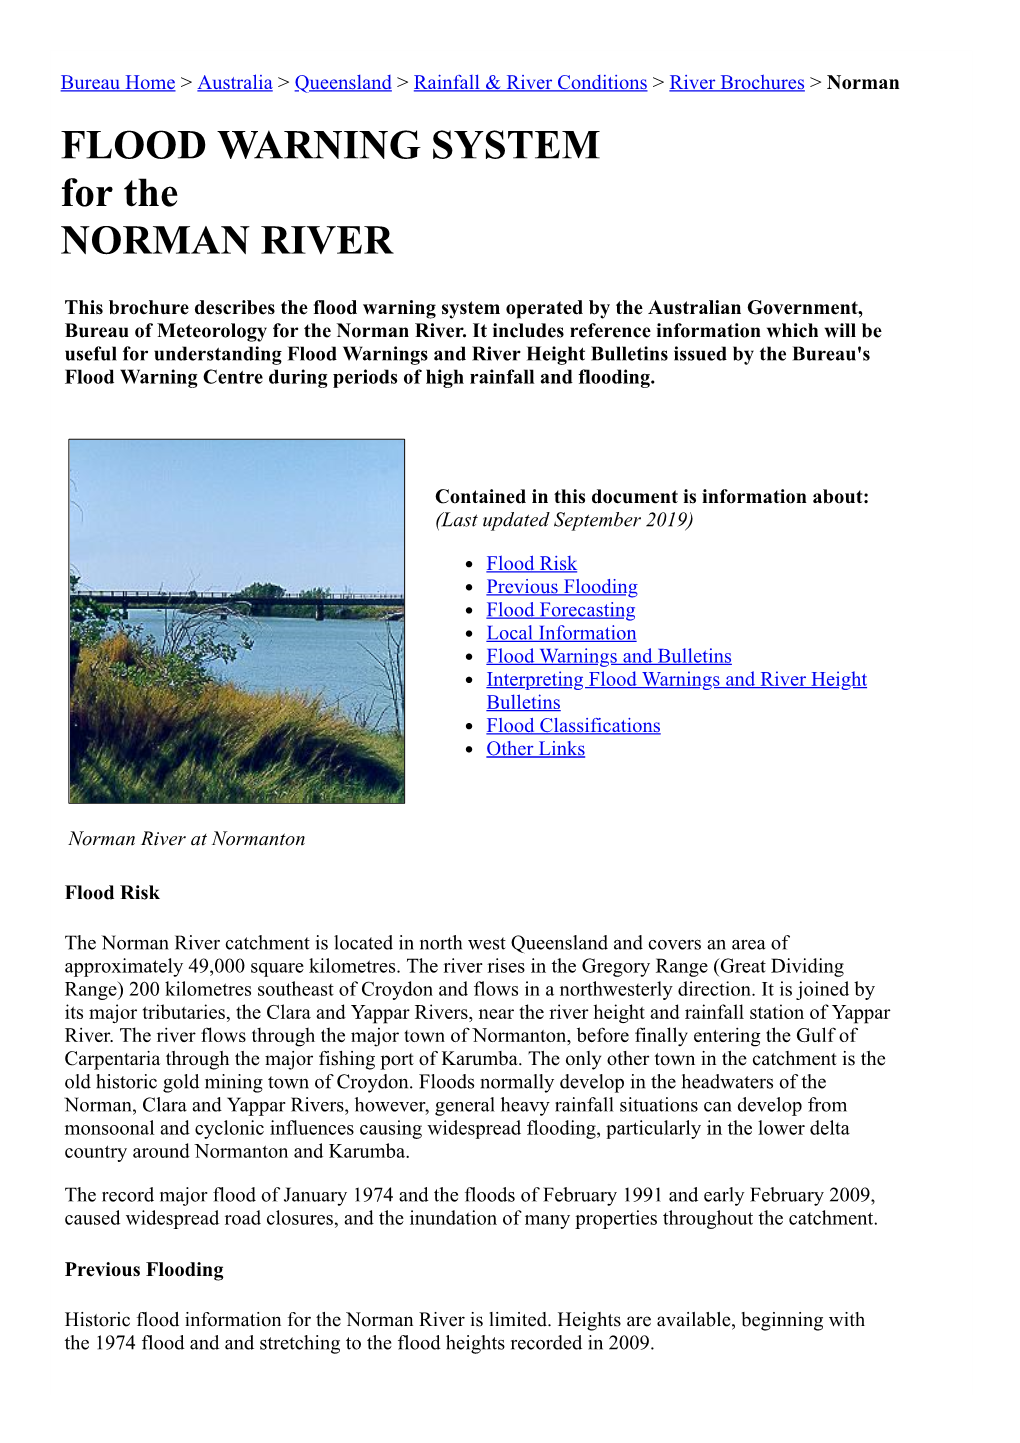 FLOOD WARNING SYSTEM for the NORMAN RIVER